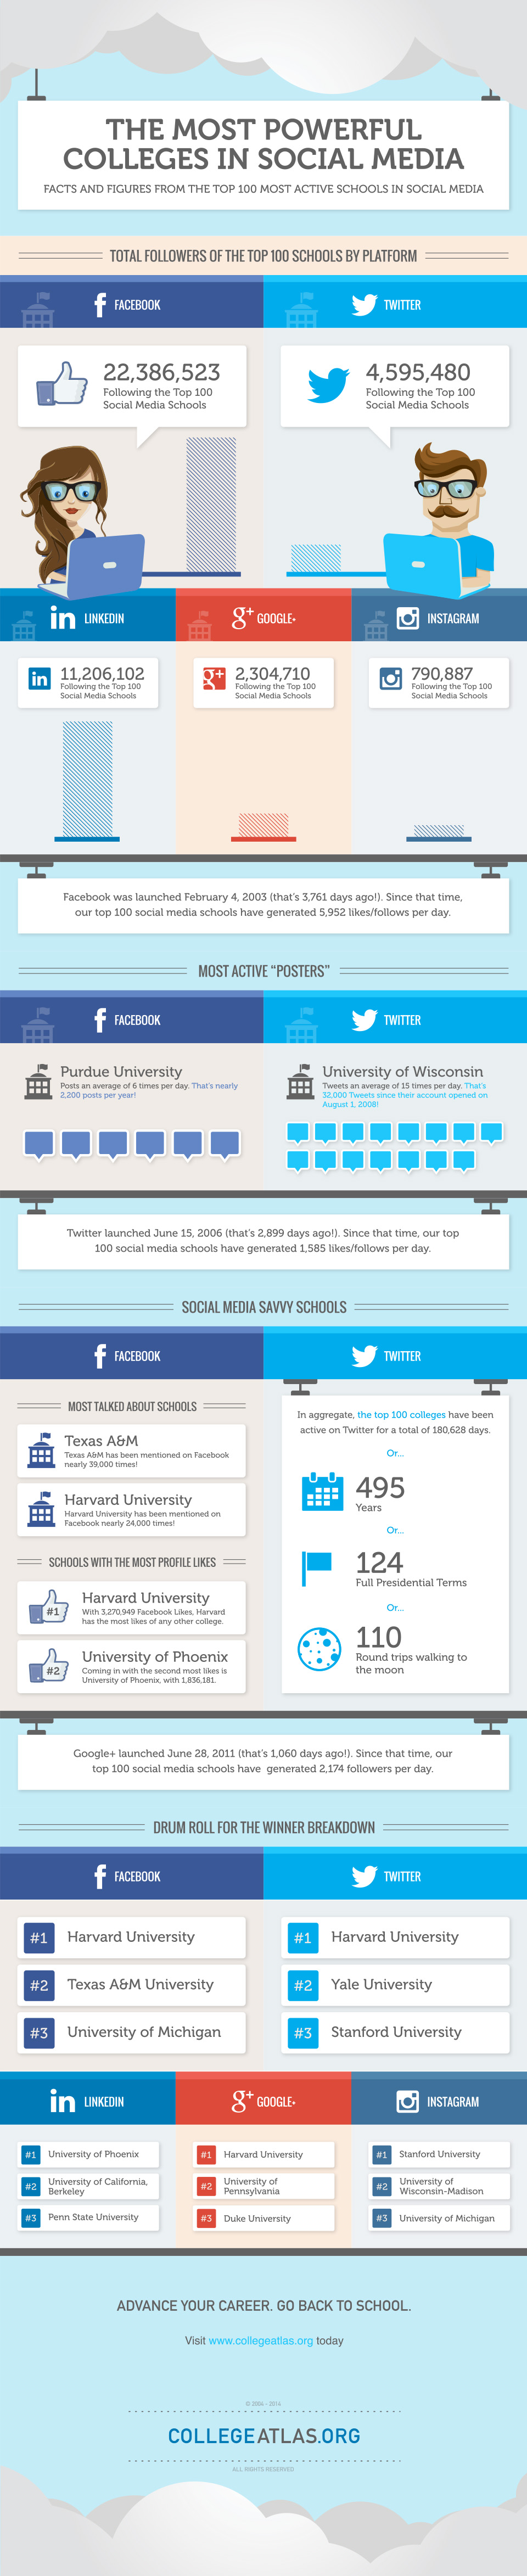 The Most Powerful Colleges in Social Media